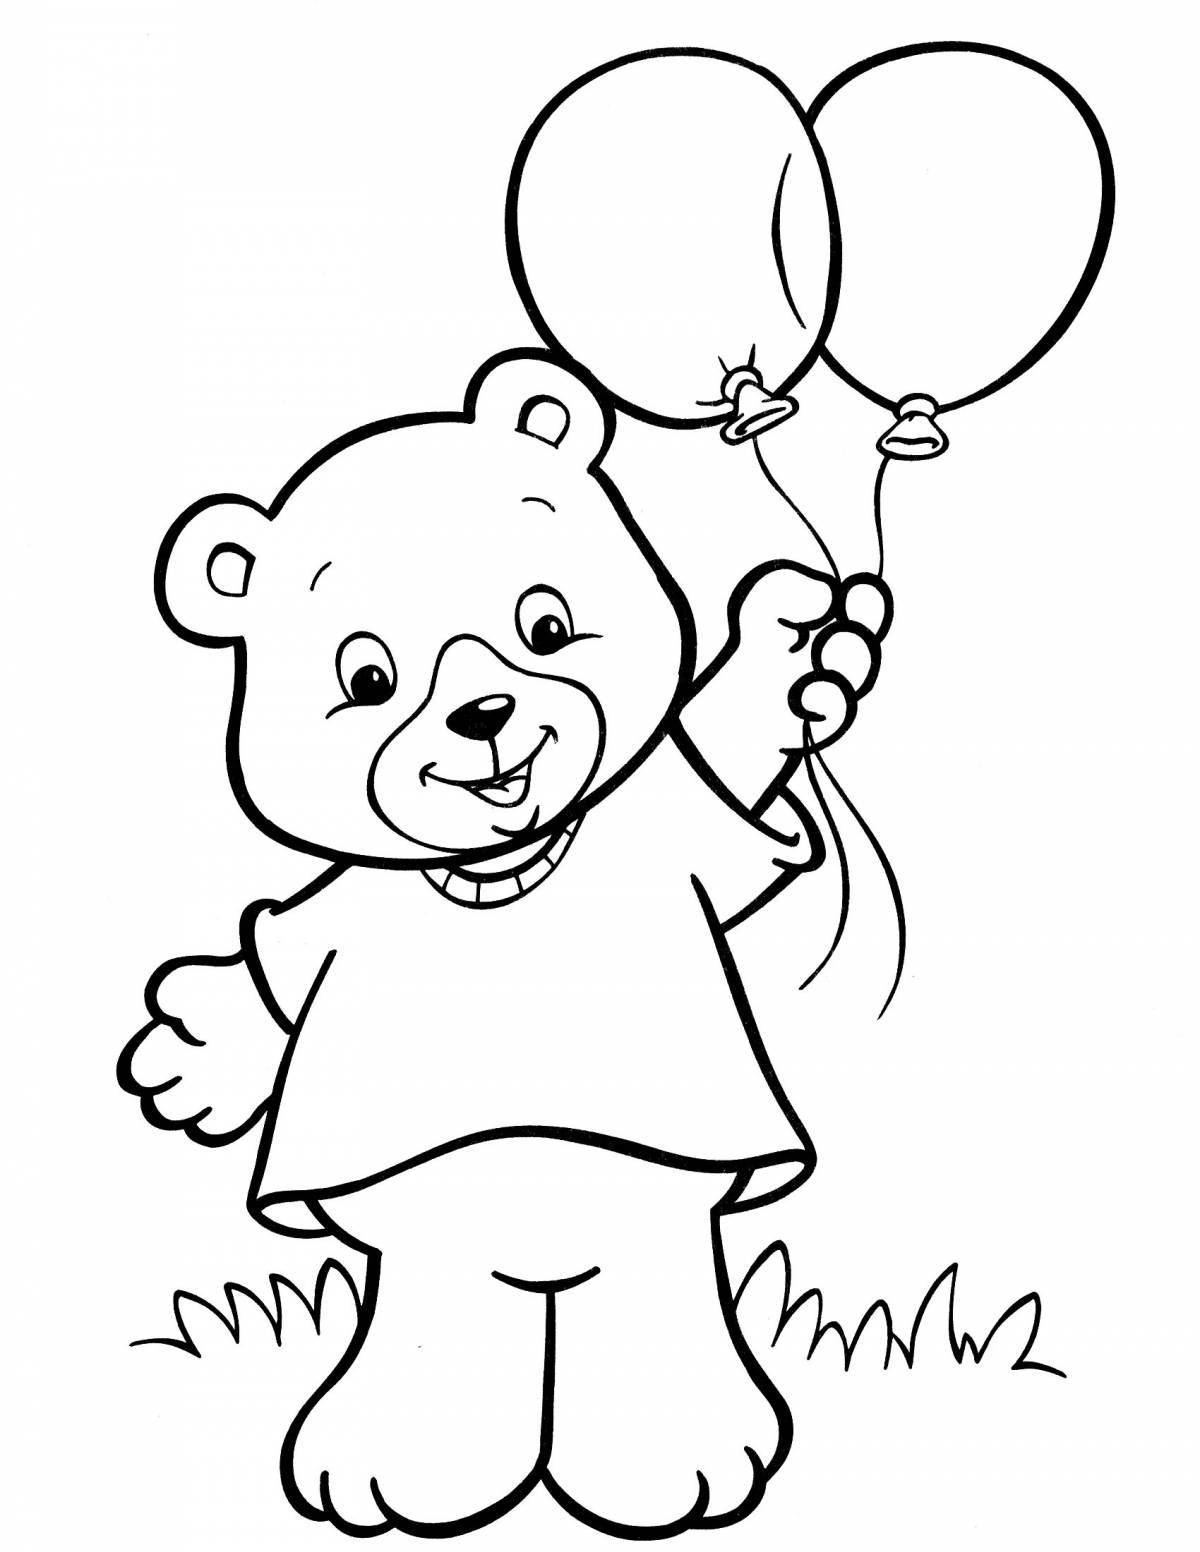 Incredible bear coloring book for kids 5-6 years old